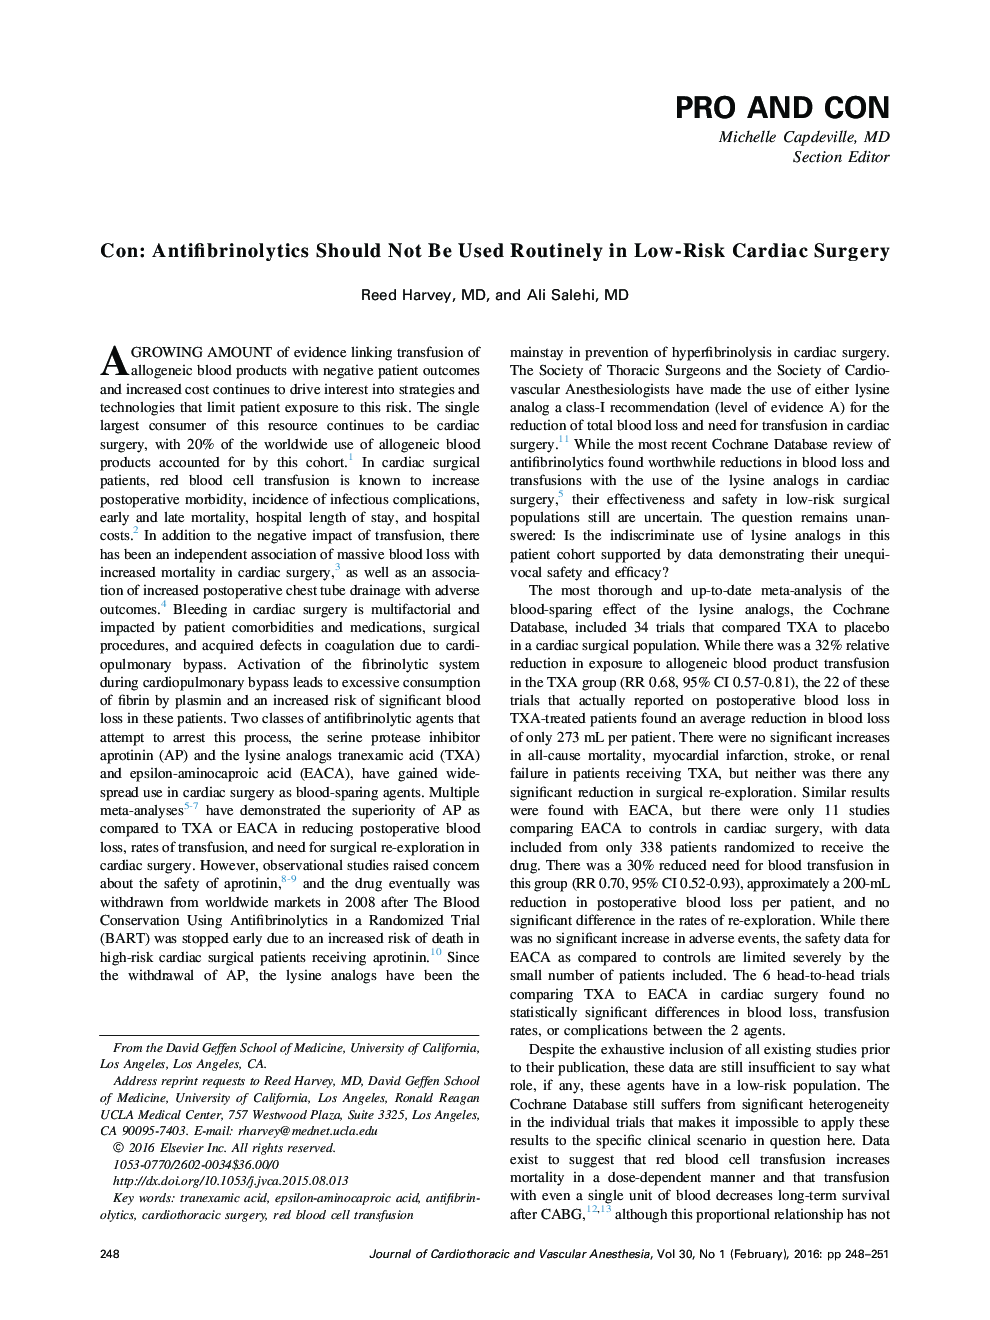 Con: Antifibrinolytics Should Not Be Used Routinely in Low-Risk Cardiac Surgery